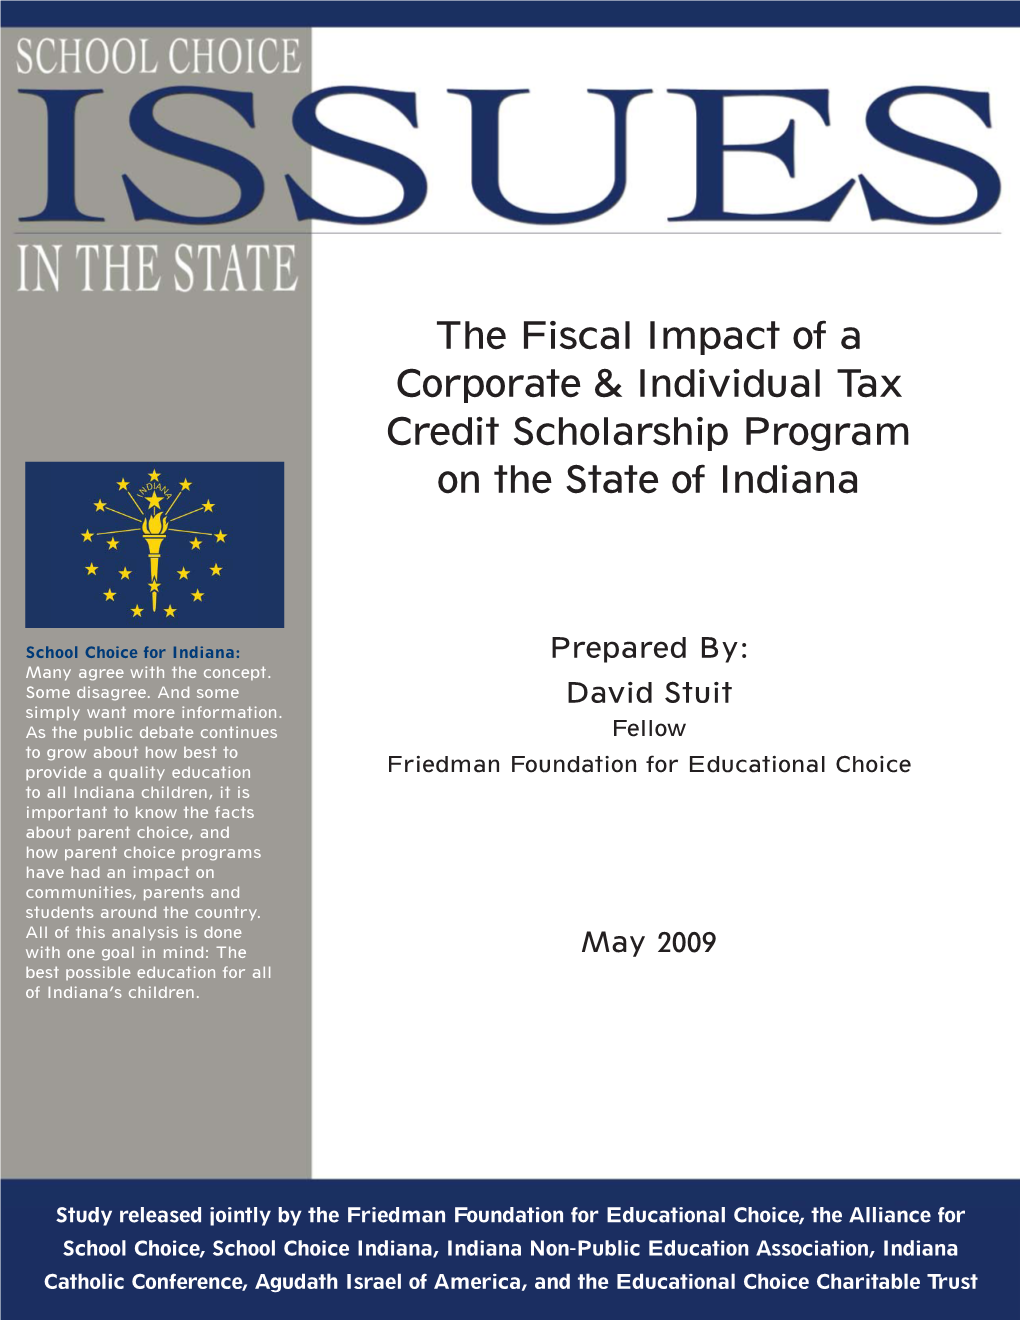 The Fiscal Impact of a Corporate & Individual Tax Credit Scholarship